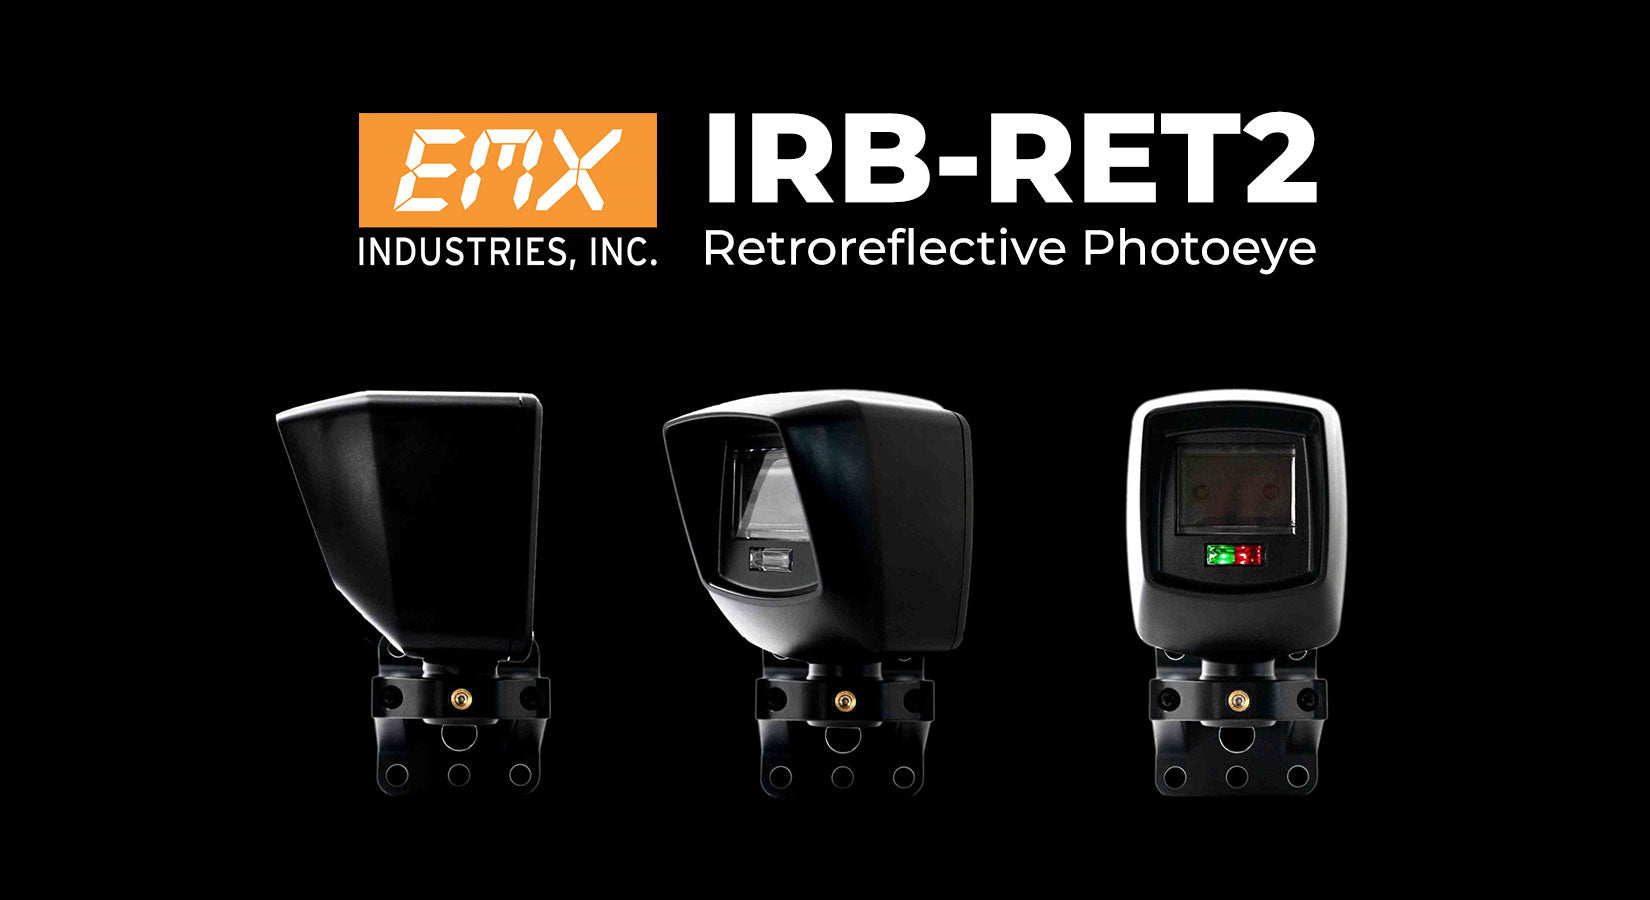 The EMX IRB-RET2 is Here: Advanced Universal Retroreflective Photoeye for Enhanced Entrapment Protection | All Security Equipment